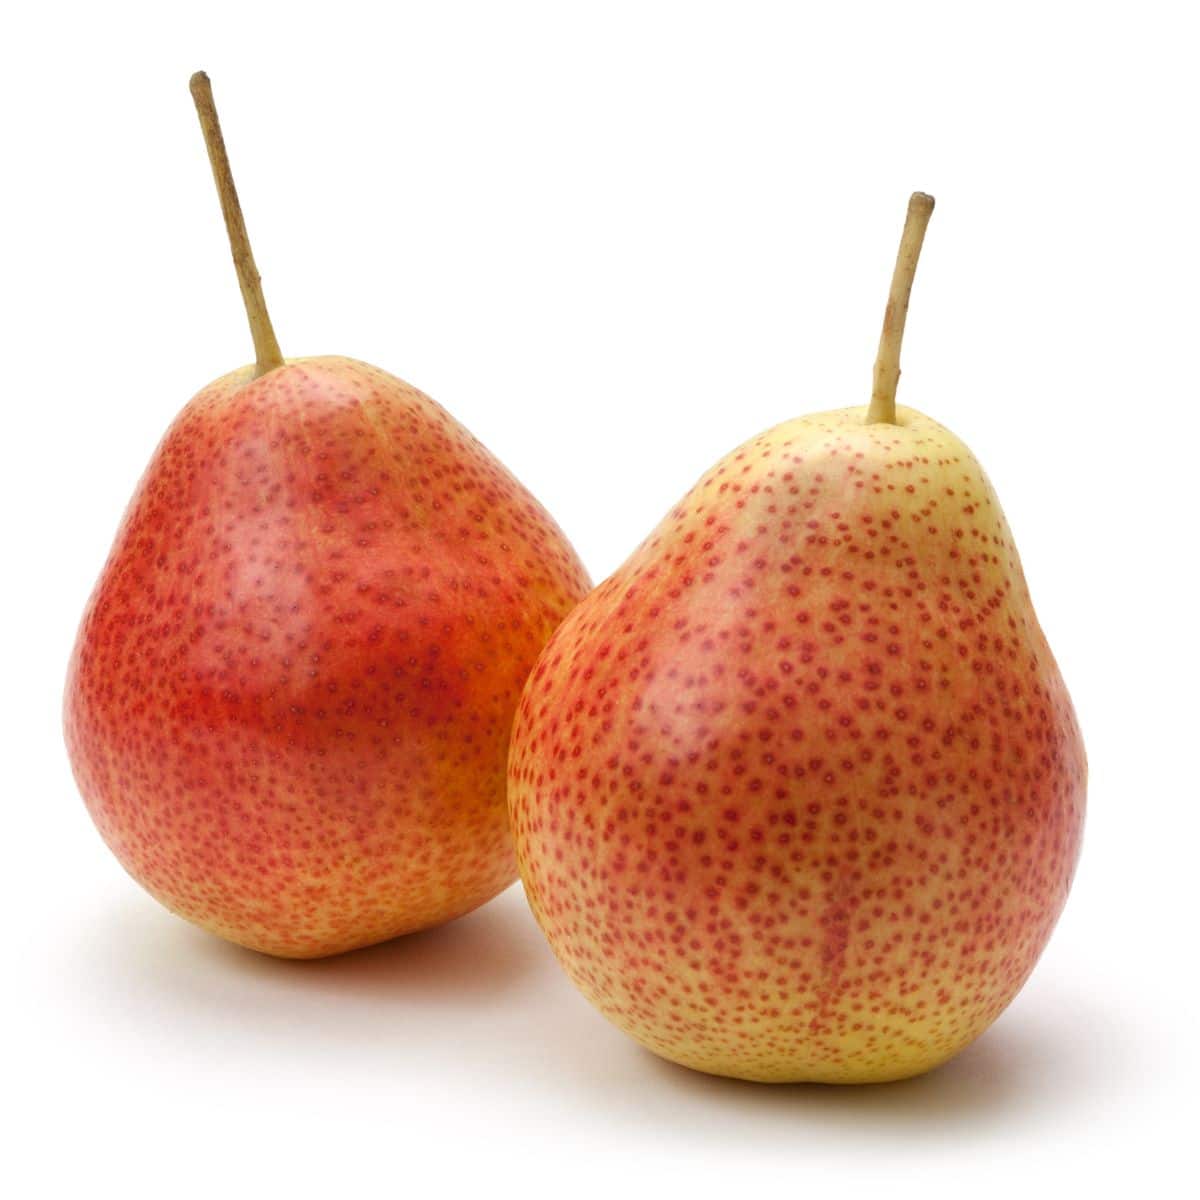 Forelle pears on a white background.